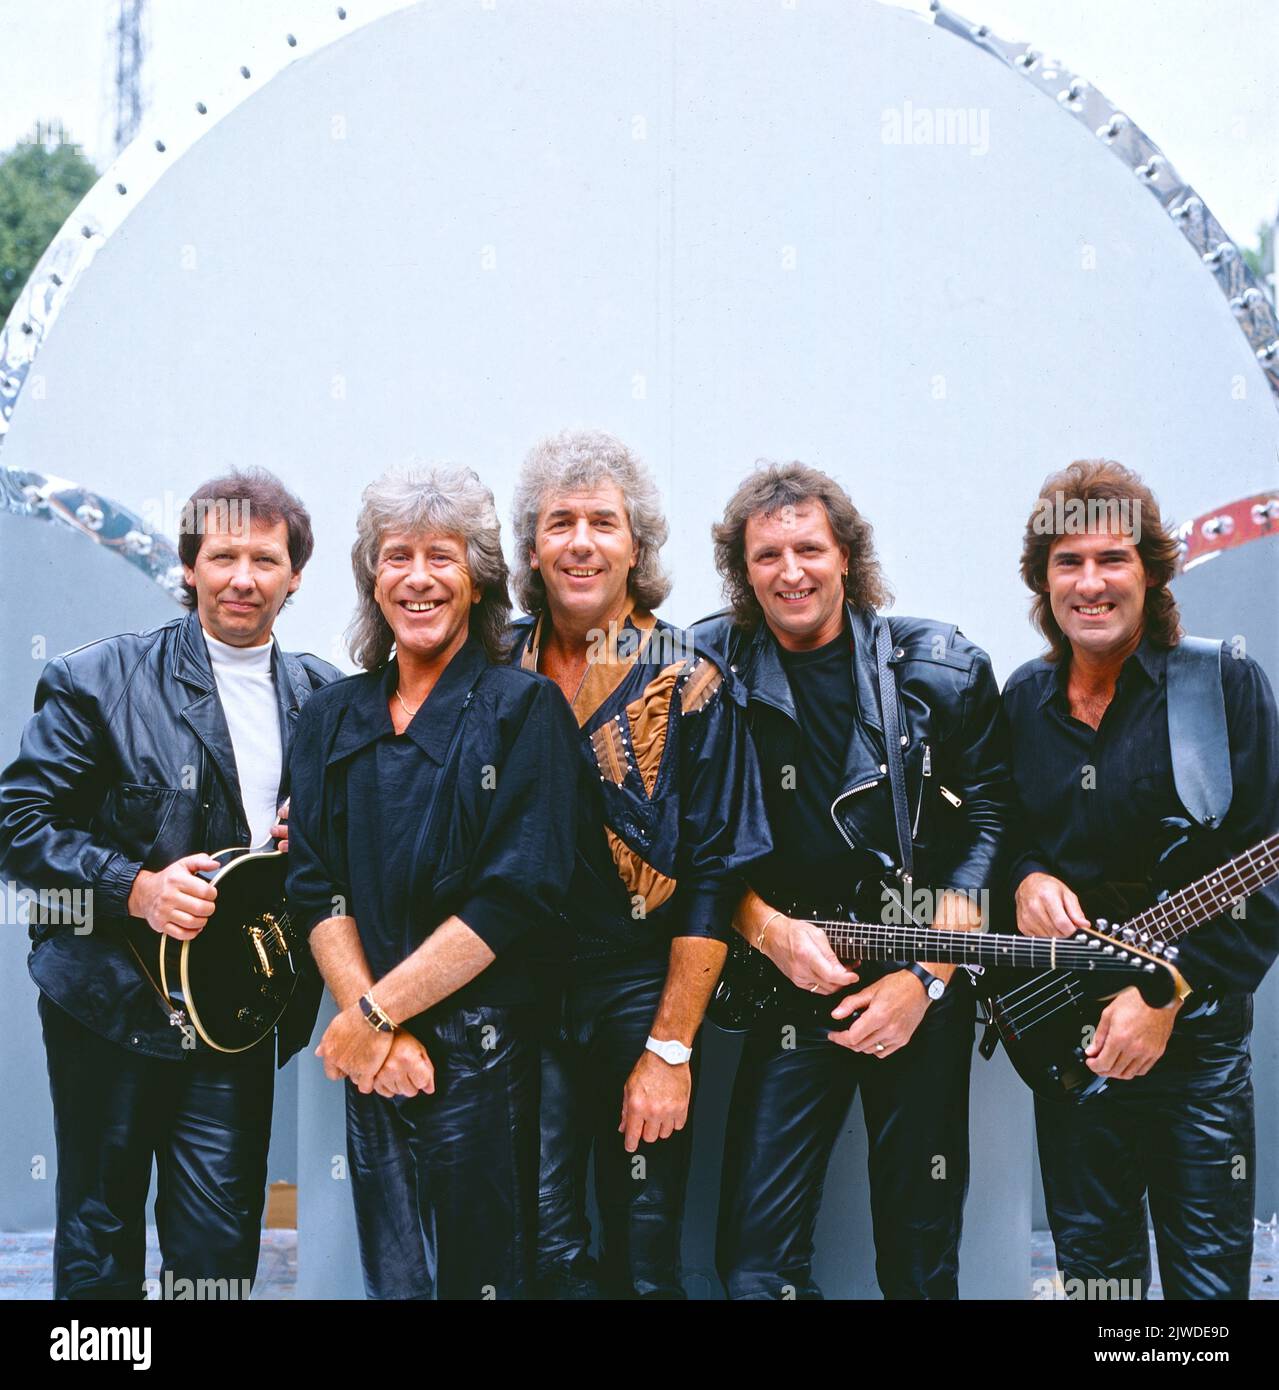 The Tremeloes, britische Pop Band, Aufnahme in Deutschland, 1989. The Tremeloes, British Pop Band, photo shoot, Germany, 1989. Stock Photo